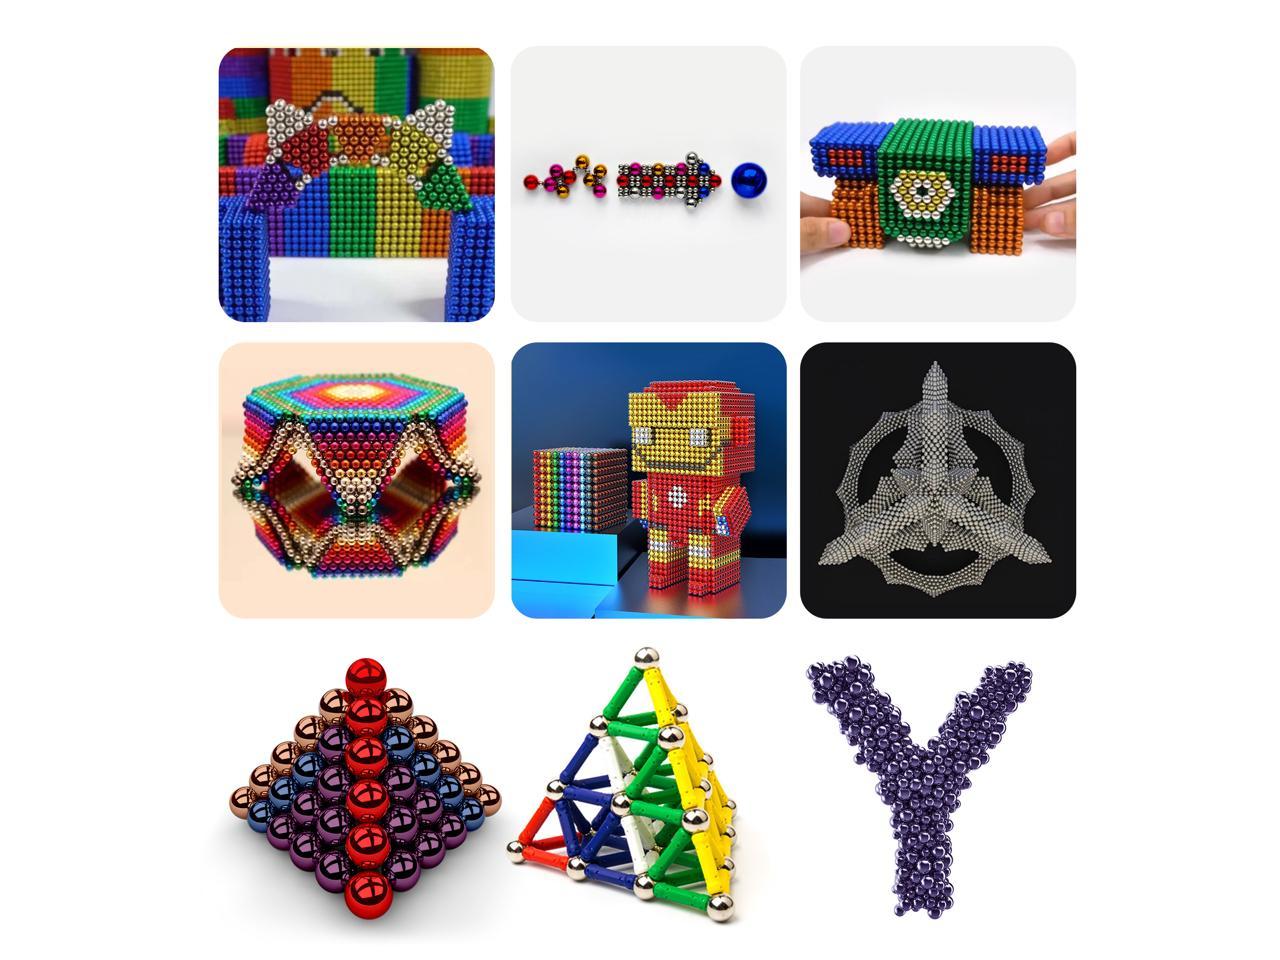 1000 DOTSOG 2019 Upgraded Ball 5MM 1000 Pieces Sculpture Building Blocks Toys for Intelligence DIY Educational Toys& Stress Relief for Adults 